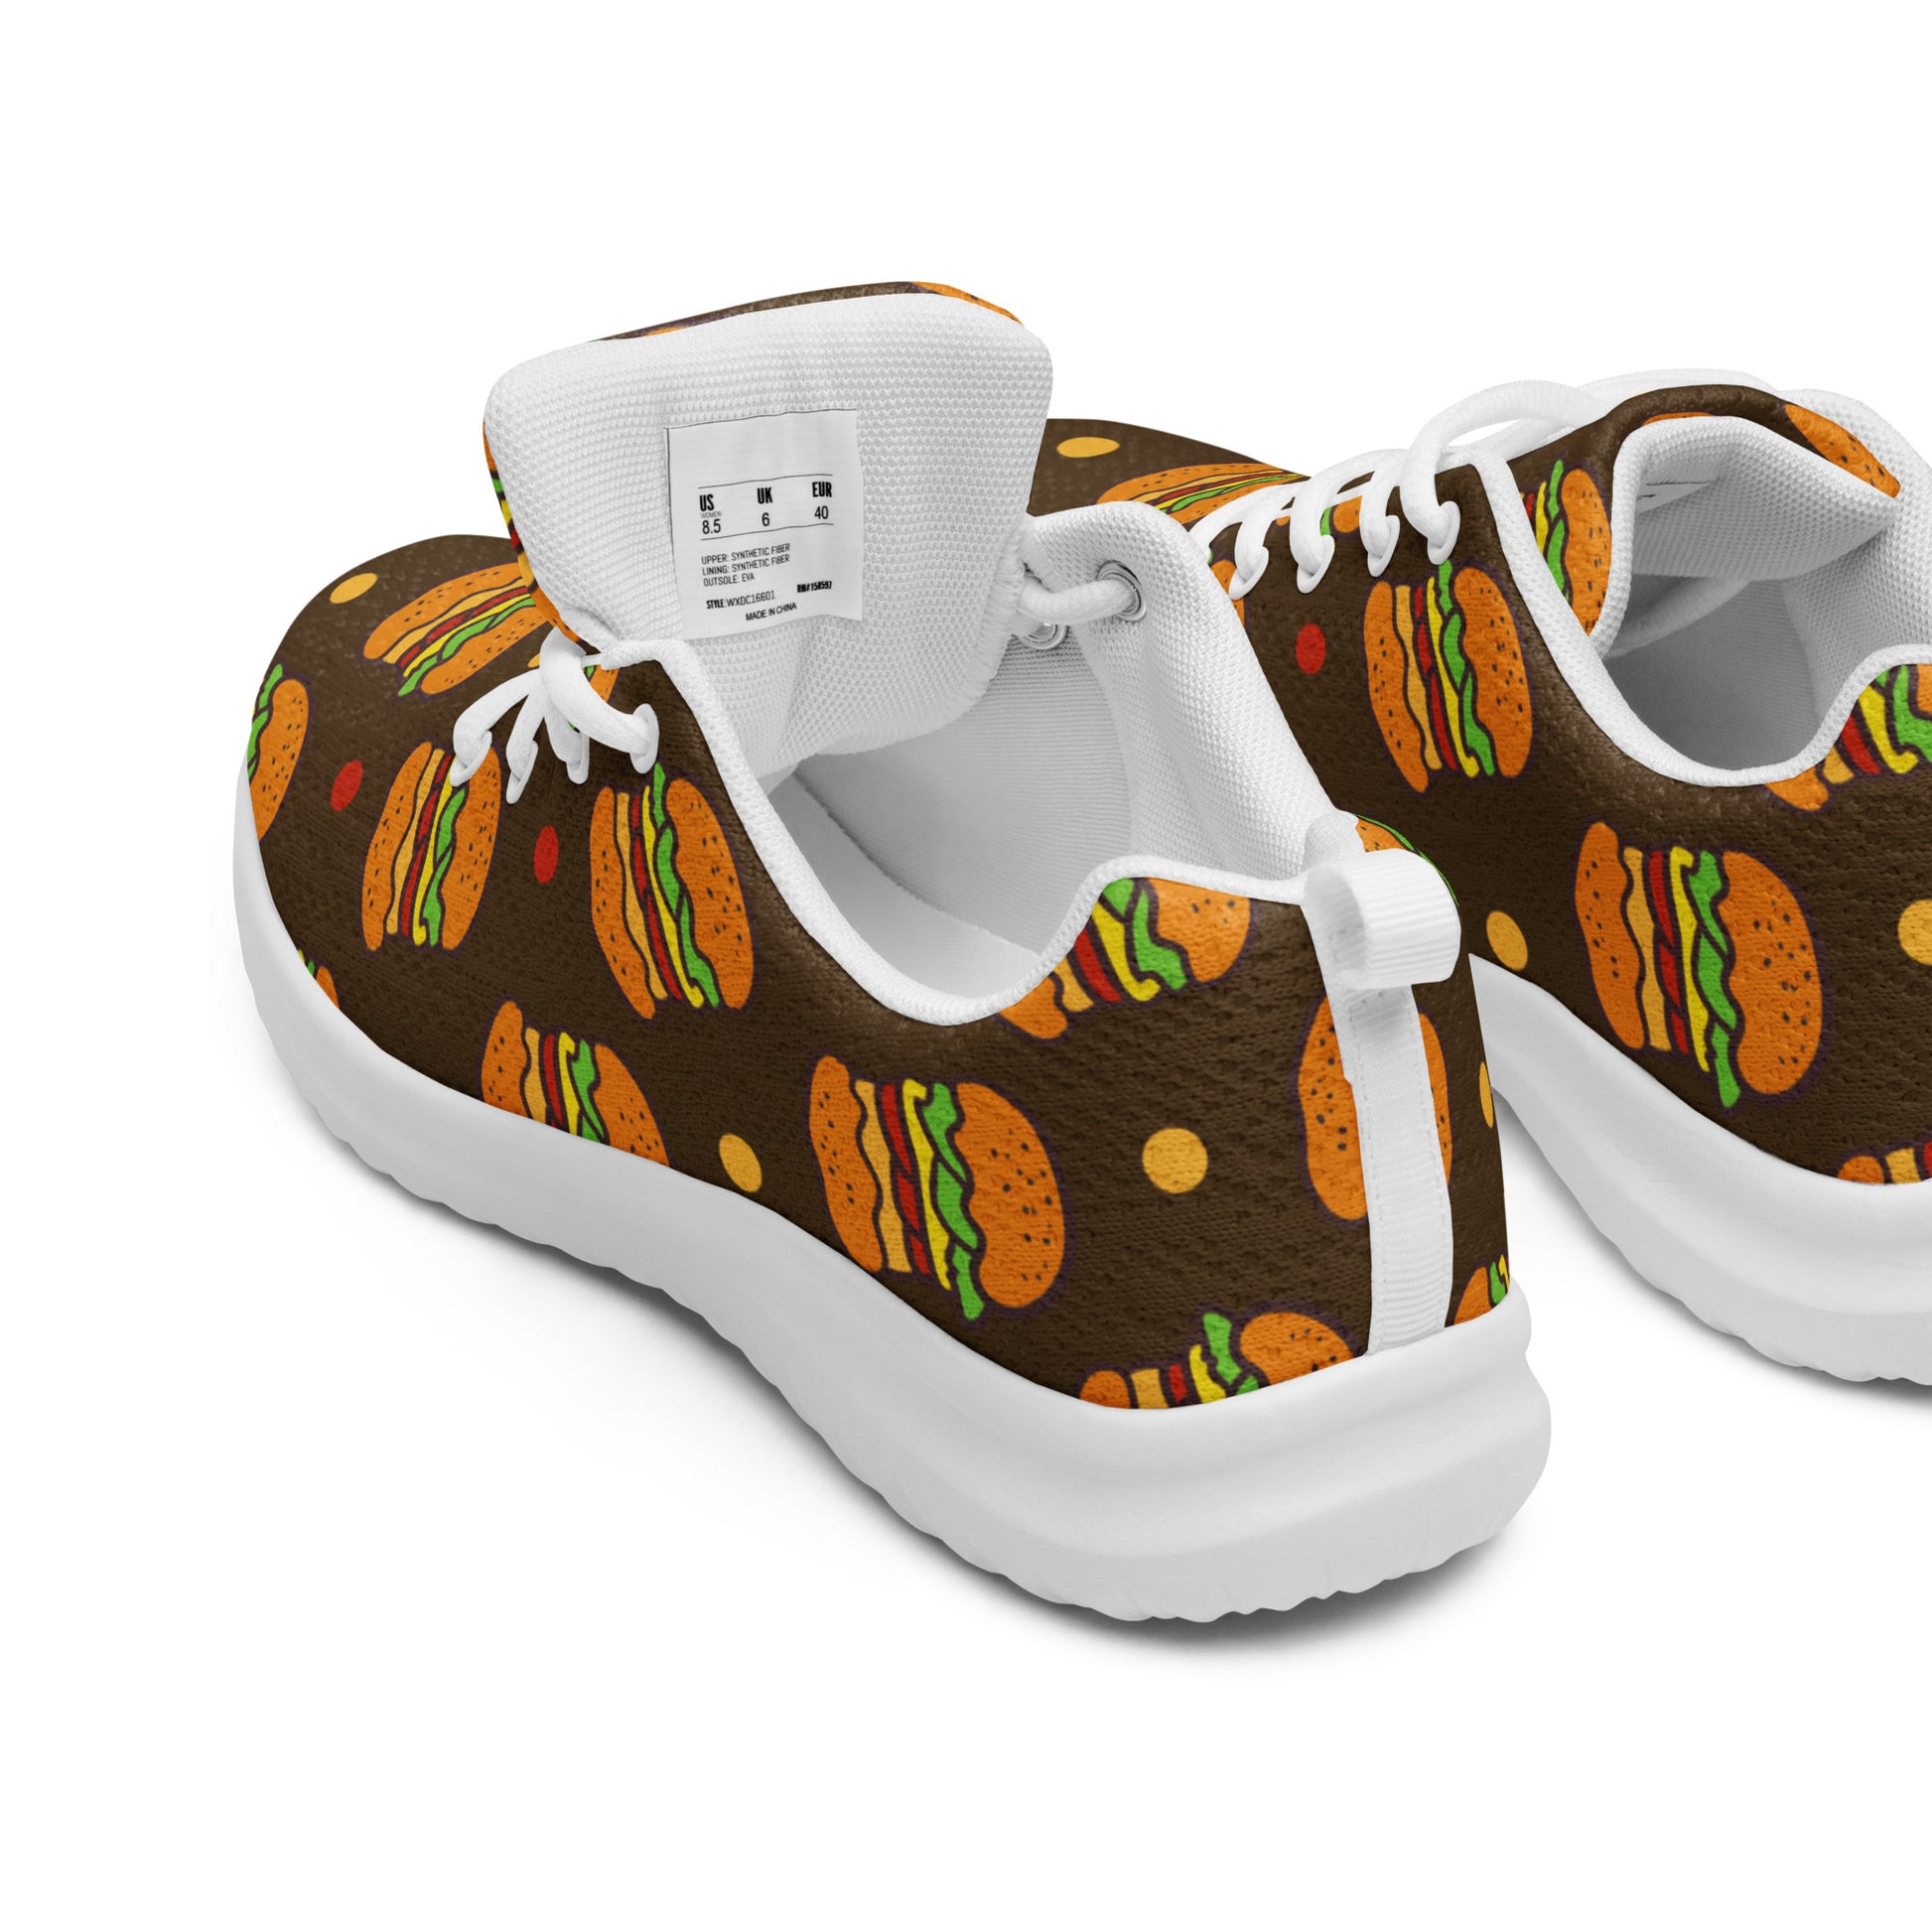 Burgers - Women’s athletic shoes Womens Athletic Shoes